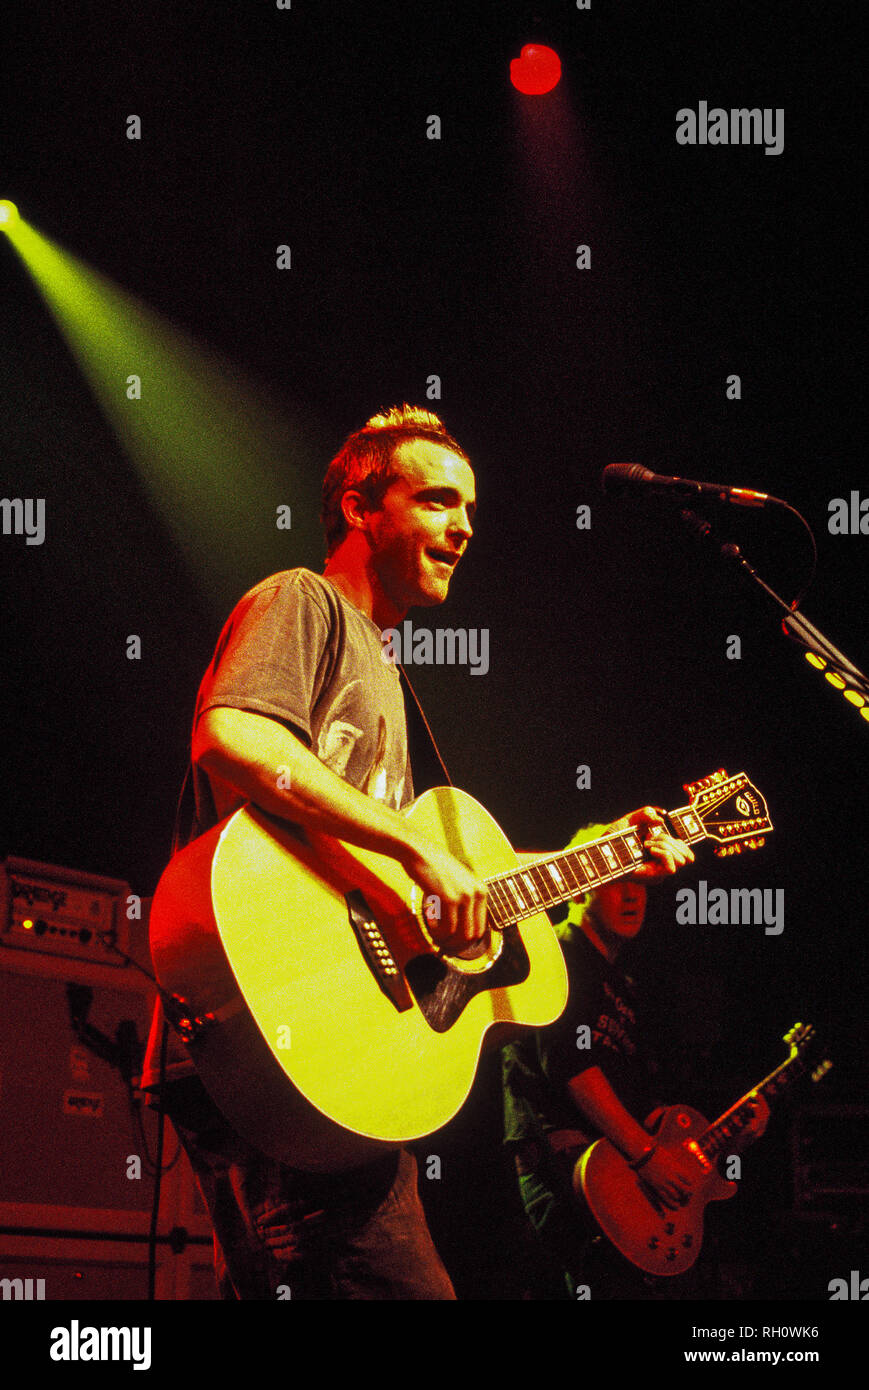 Fran Healey lead singer of the band Travis performing at the Kentish Town Forum on 16th September 2001, London, England, united Kingdom. Stock Photo